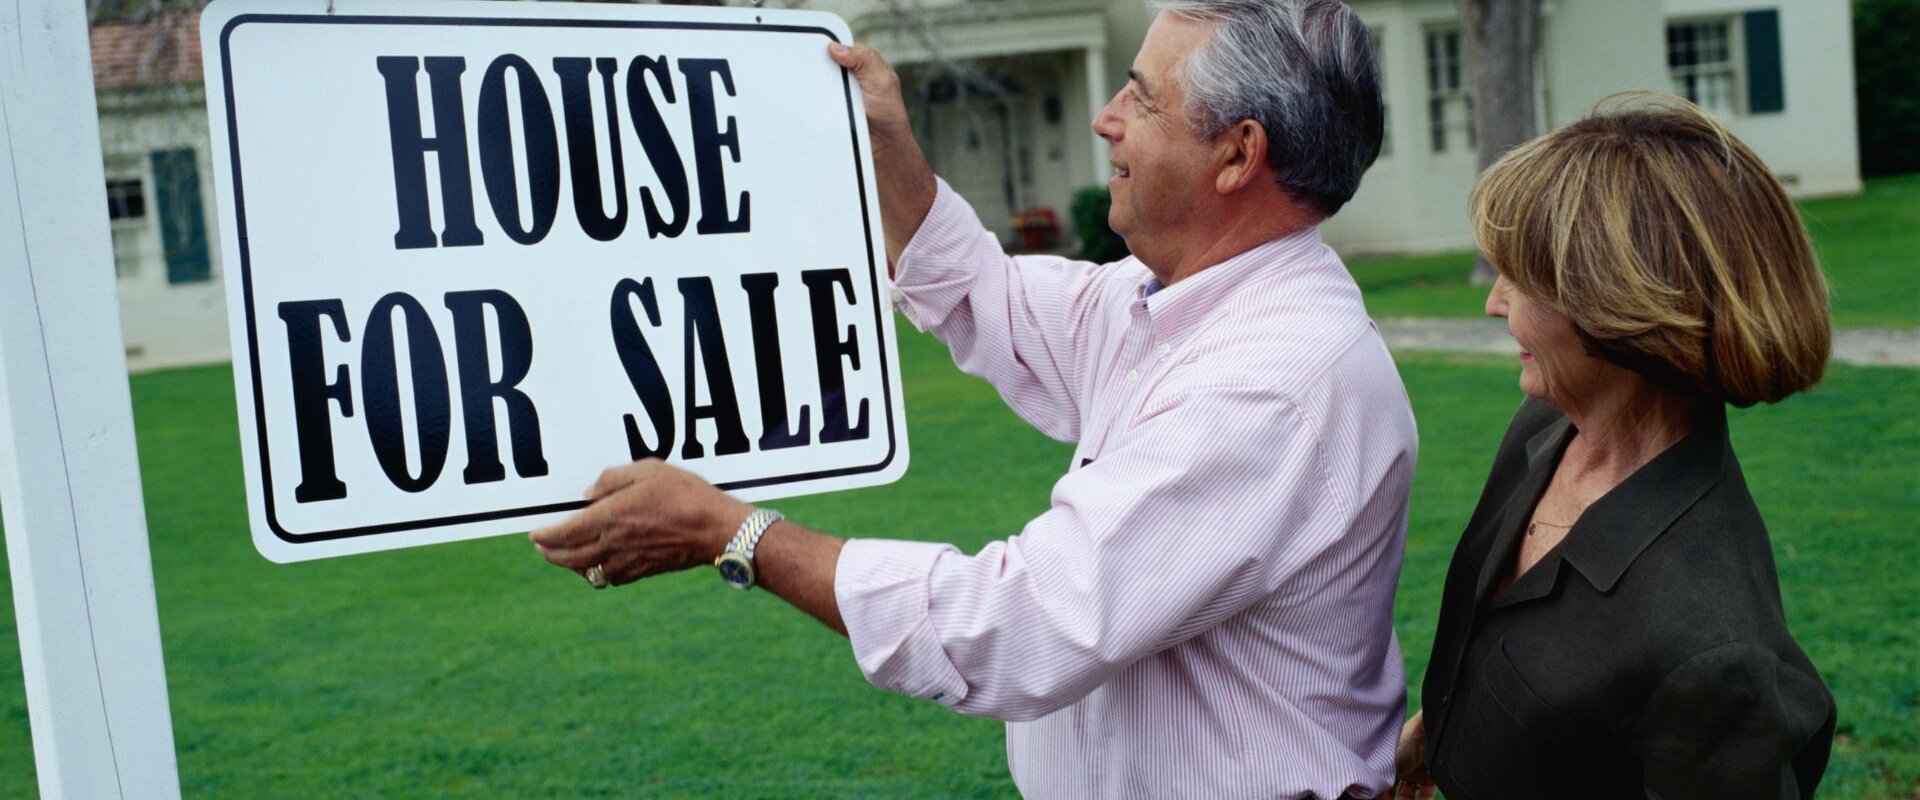 A couple holding a "House for Sale" signboard